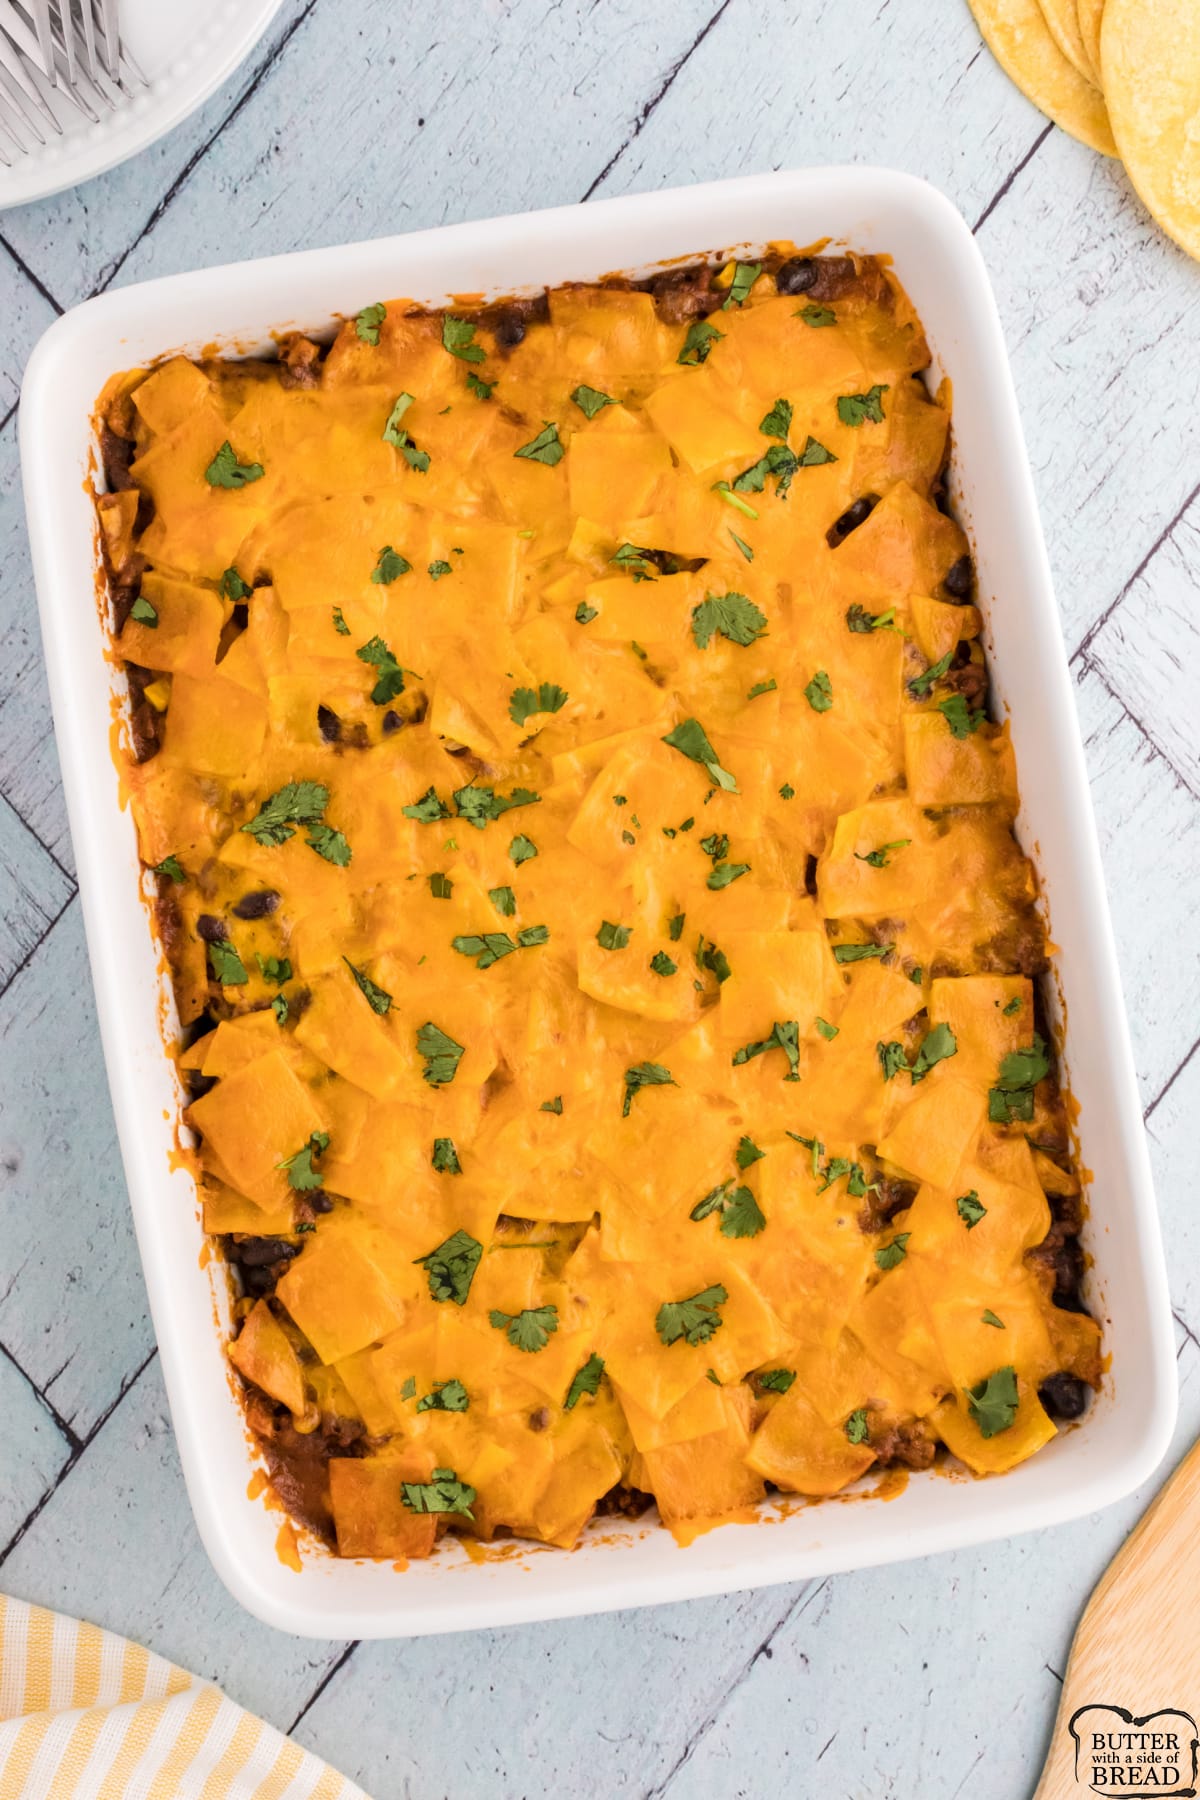 Simple weeknight casserole with meat